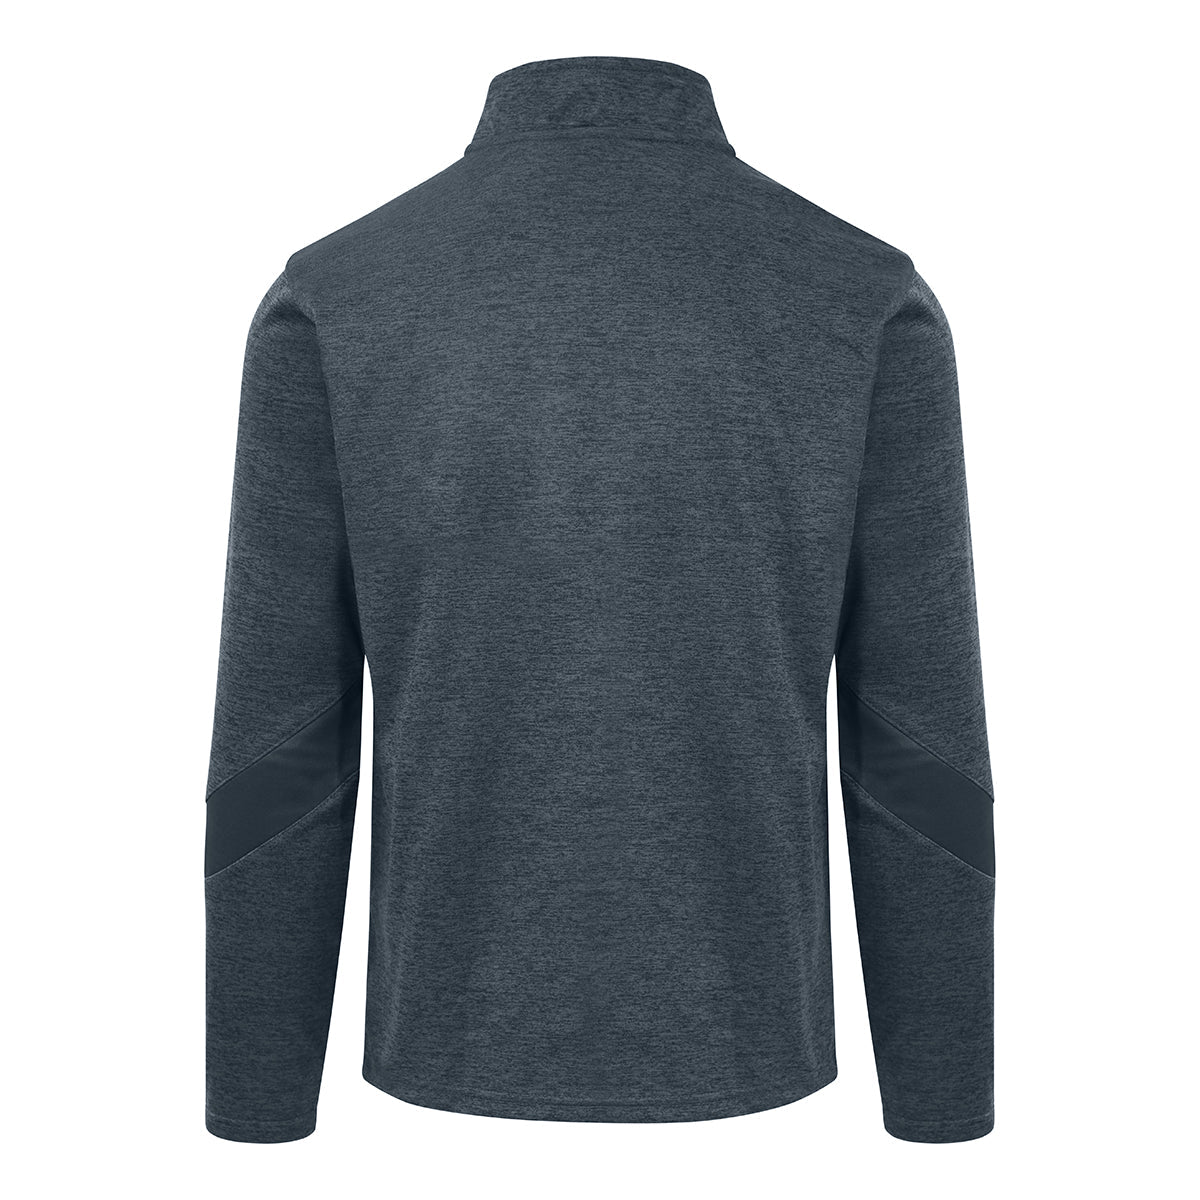 Mc Keever Eire Og GAC Craigavon Core 22 1/4 Zip Top - Adult - Charcoal